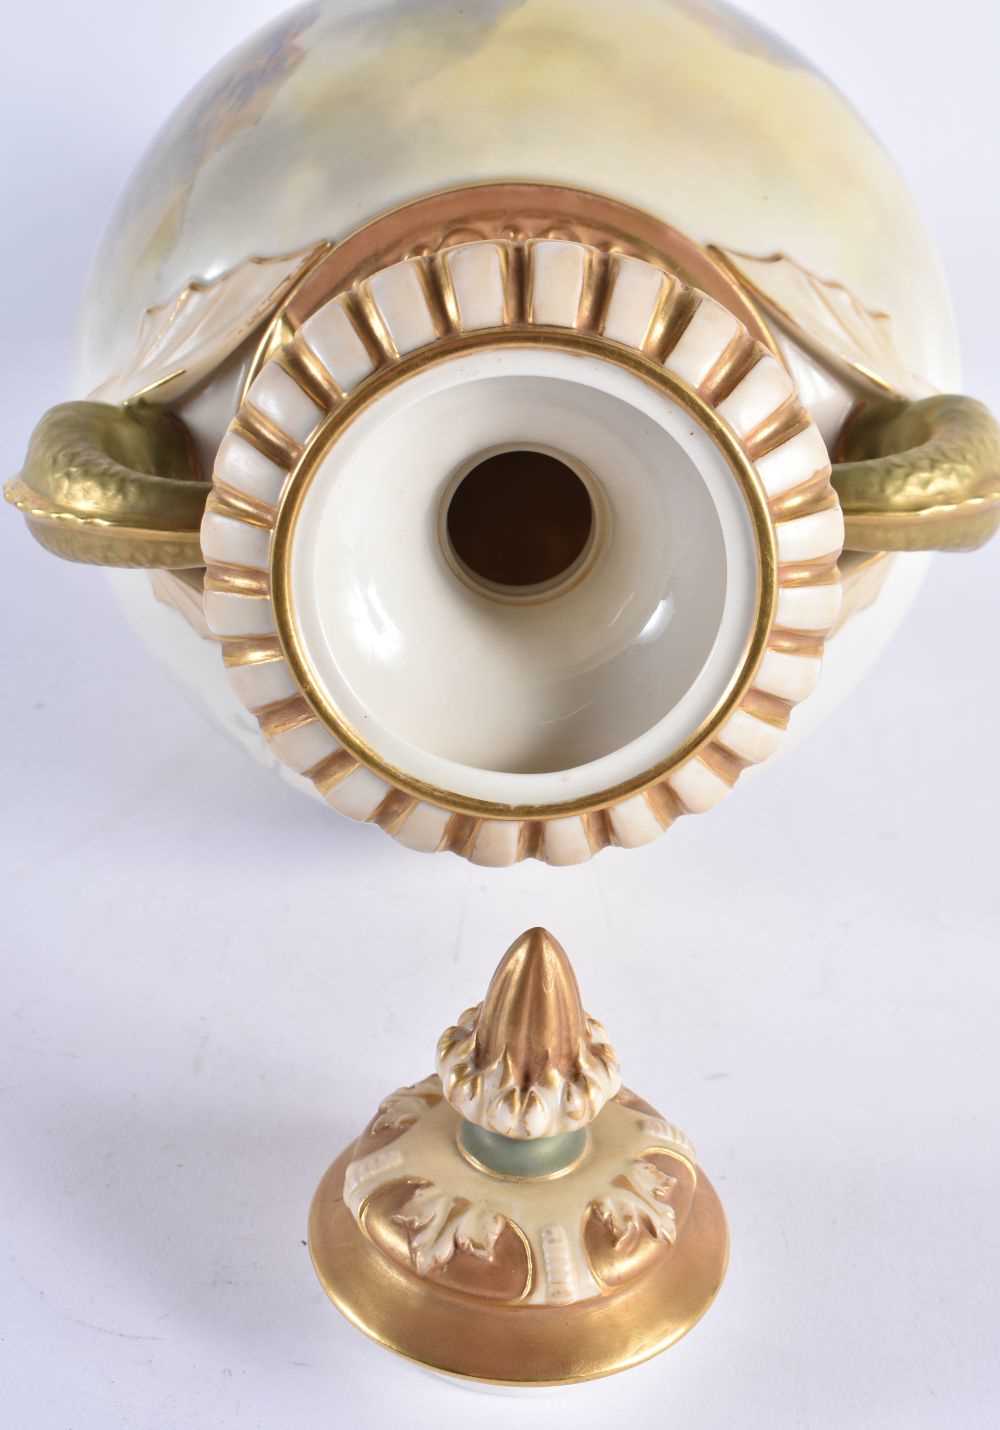 A FINE LARGE ROYAL WORCESTER PORCELAIN TWIN HANDLED VASE AND COVER by John Stinton, painted with two - Image 14 of 15